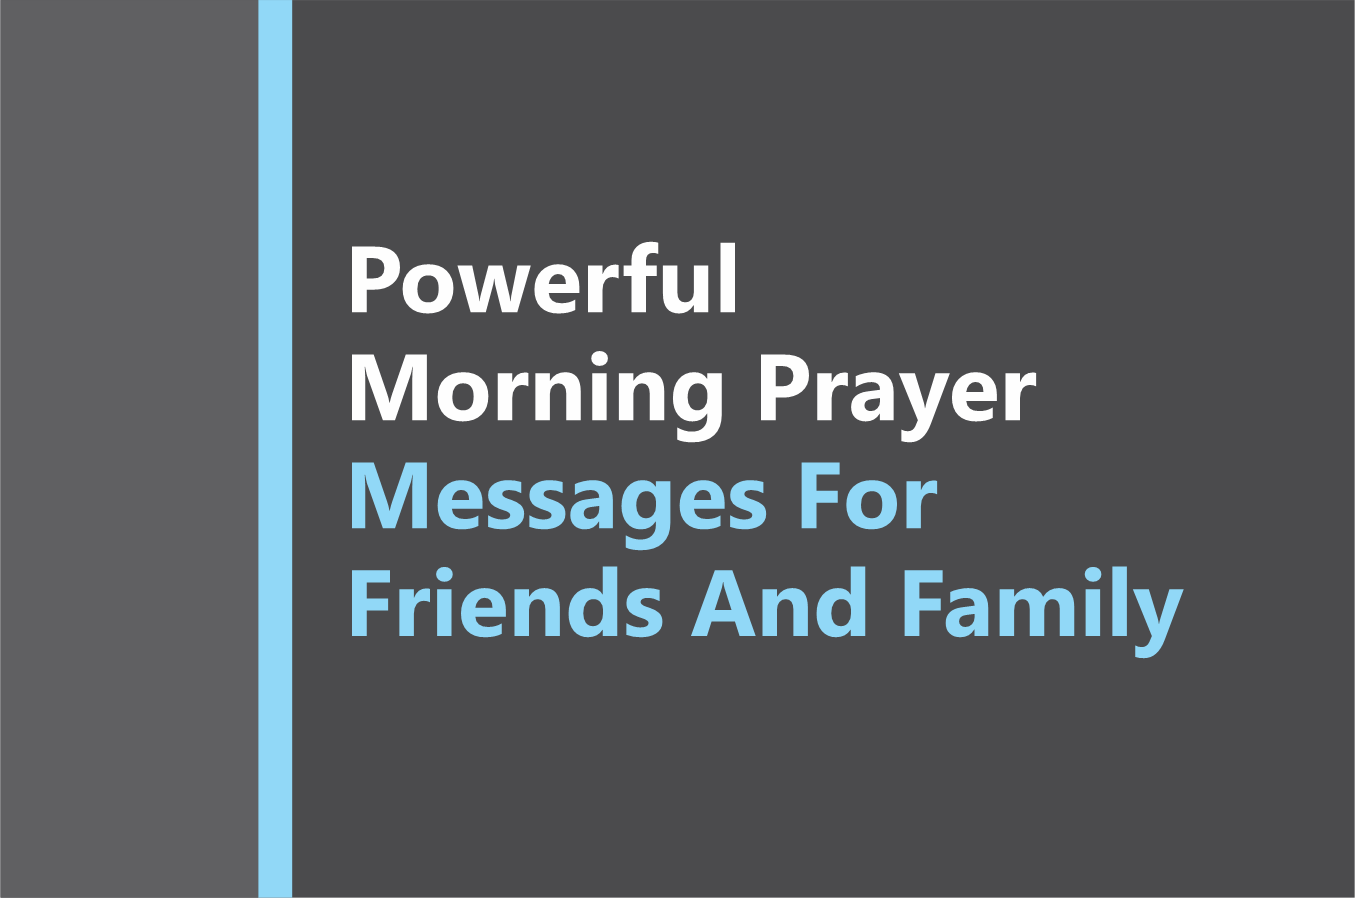 Bless Your Day With This Powerful Morning Prayer